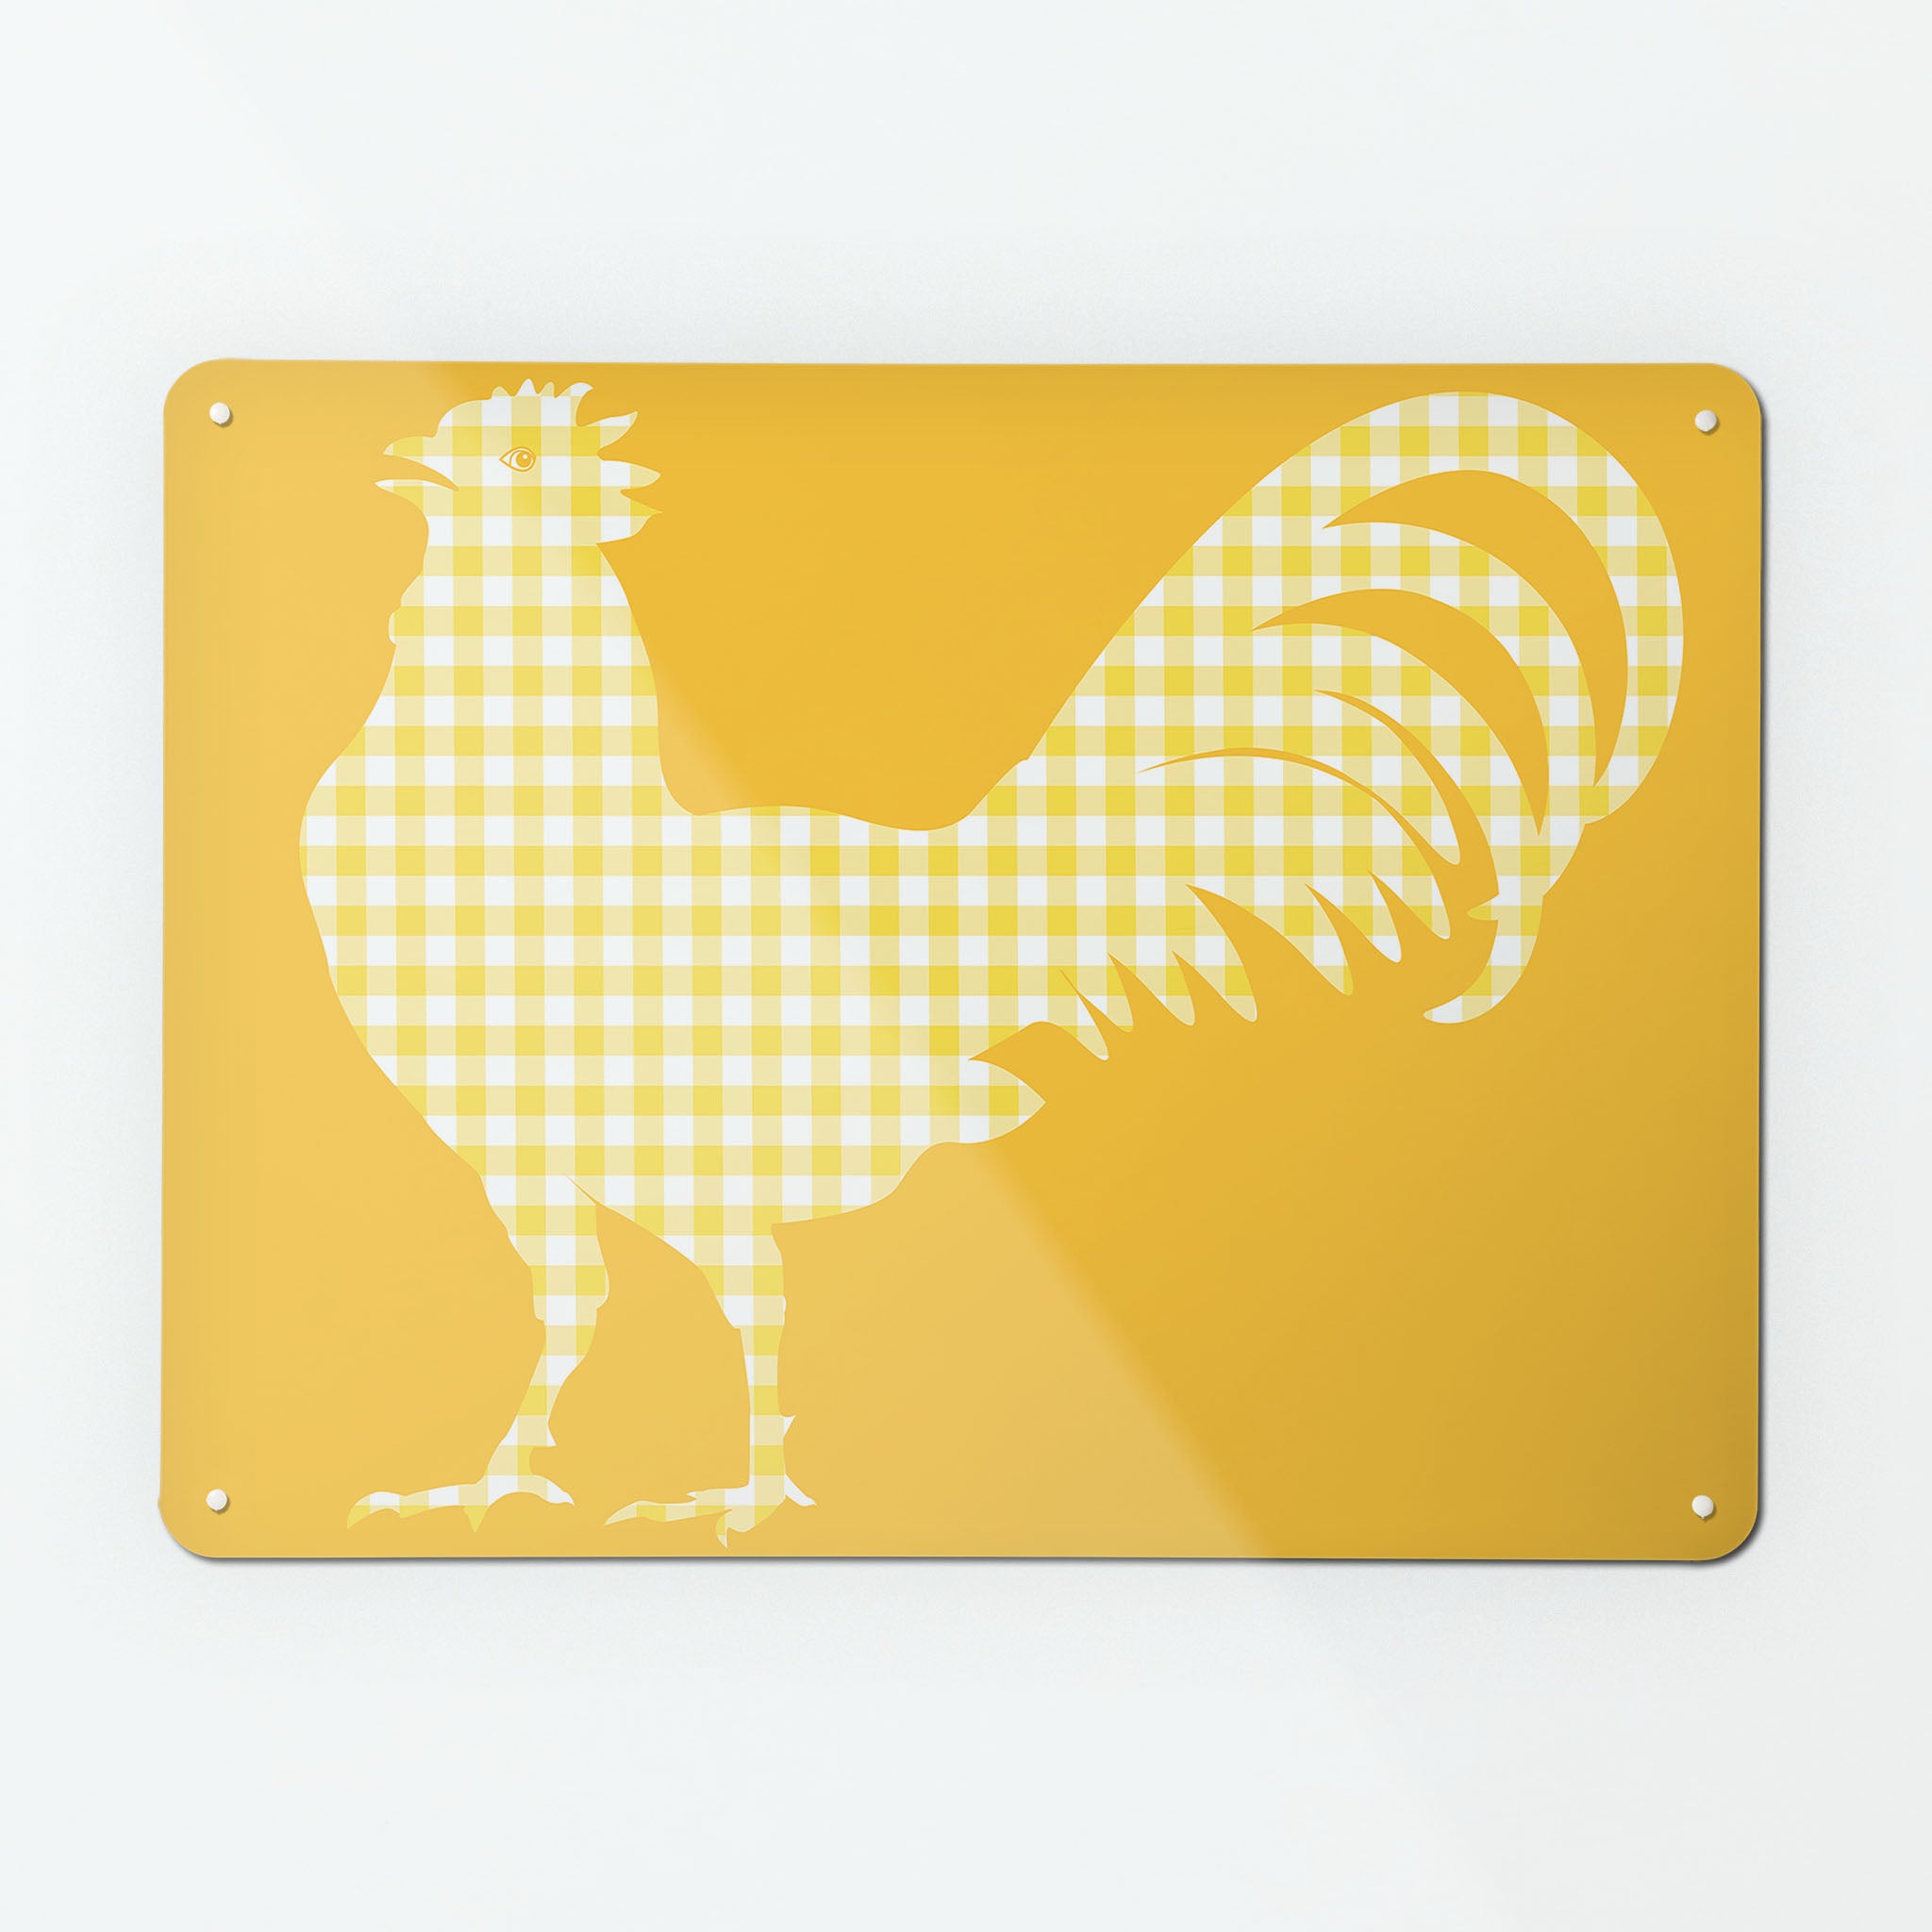 A large magnetic notice board by Beyond the Fridge with a yellow gingham cockerel design